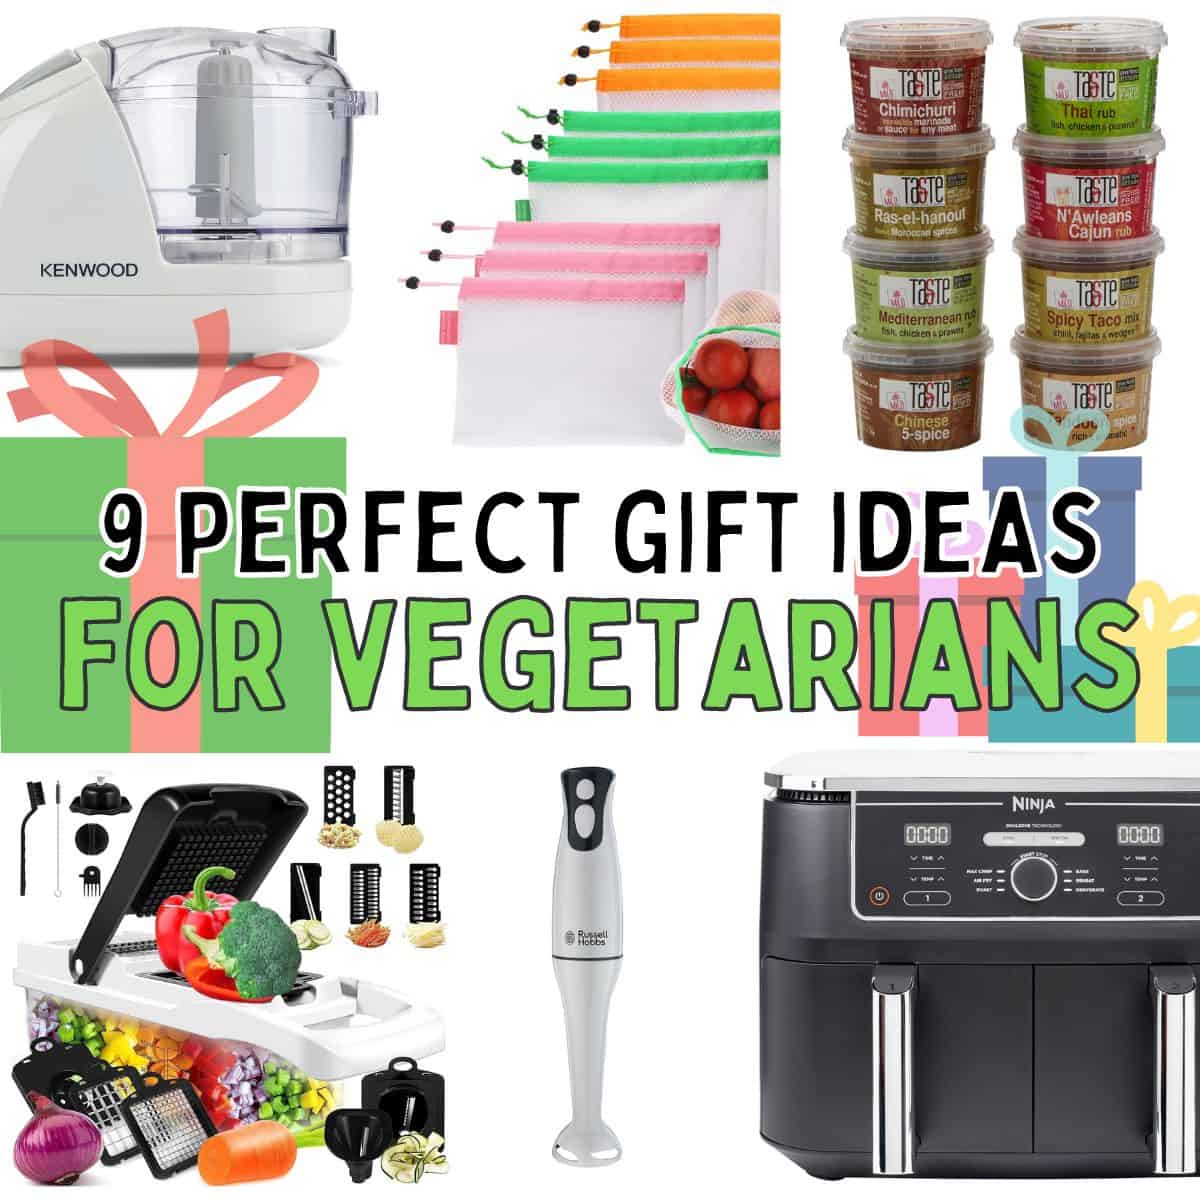 Collage showing perfect gift ideas for vegetarians with text overlay.